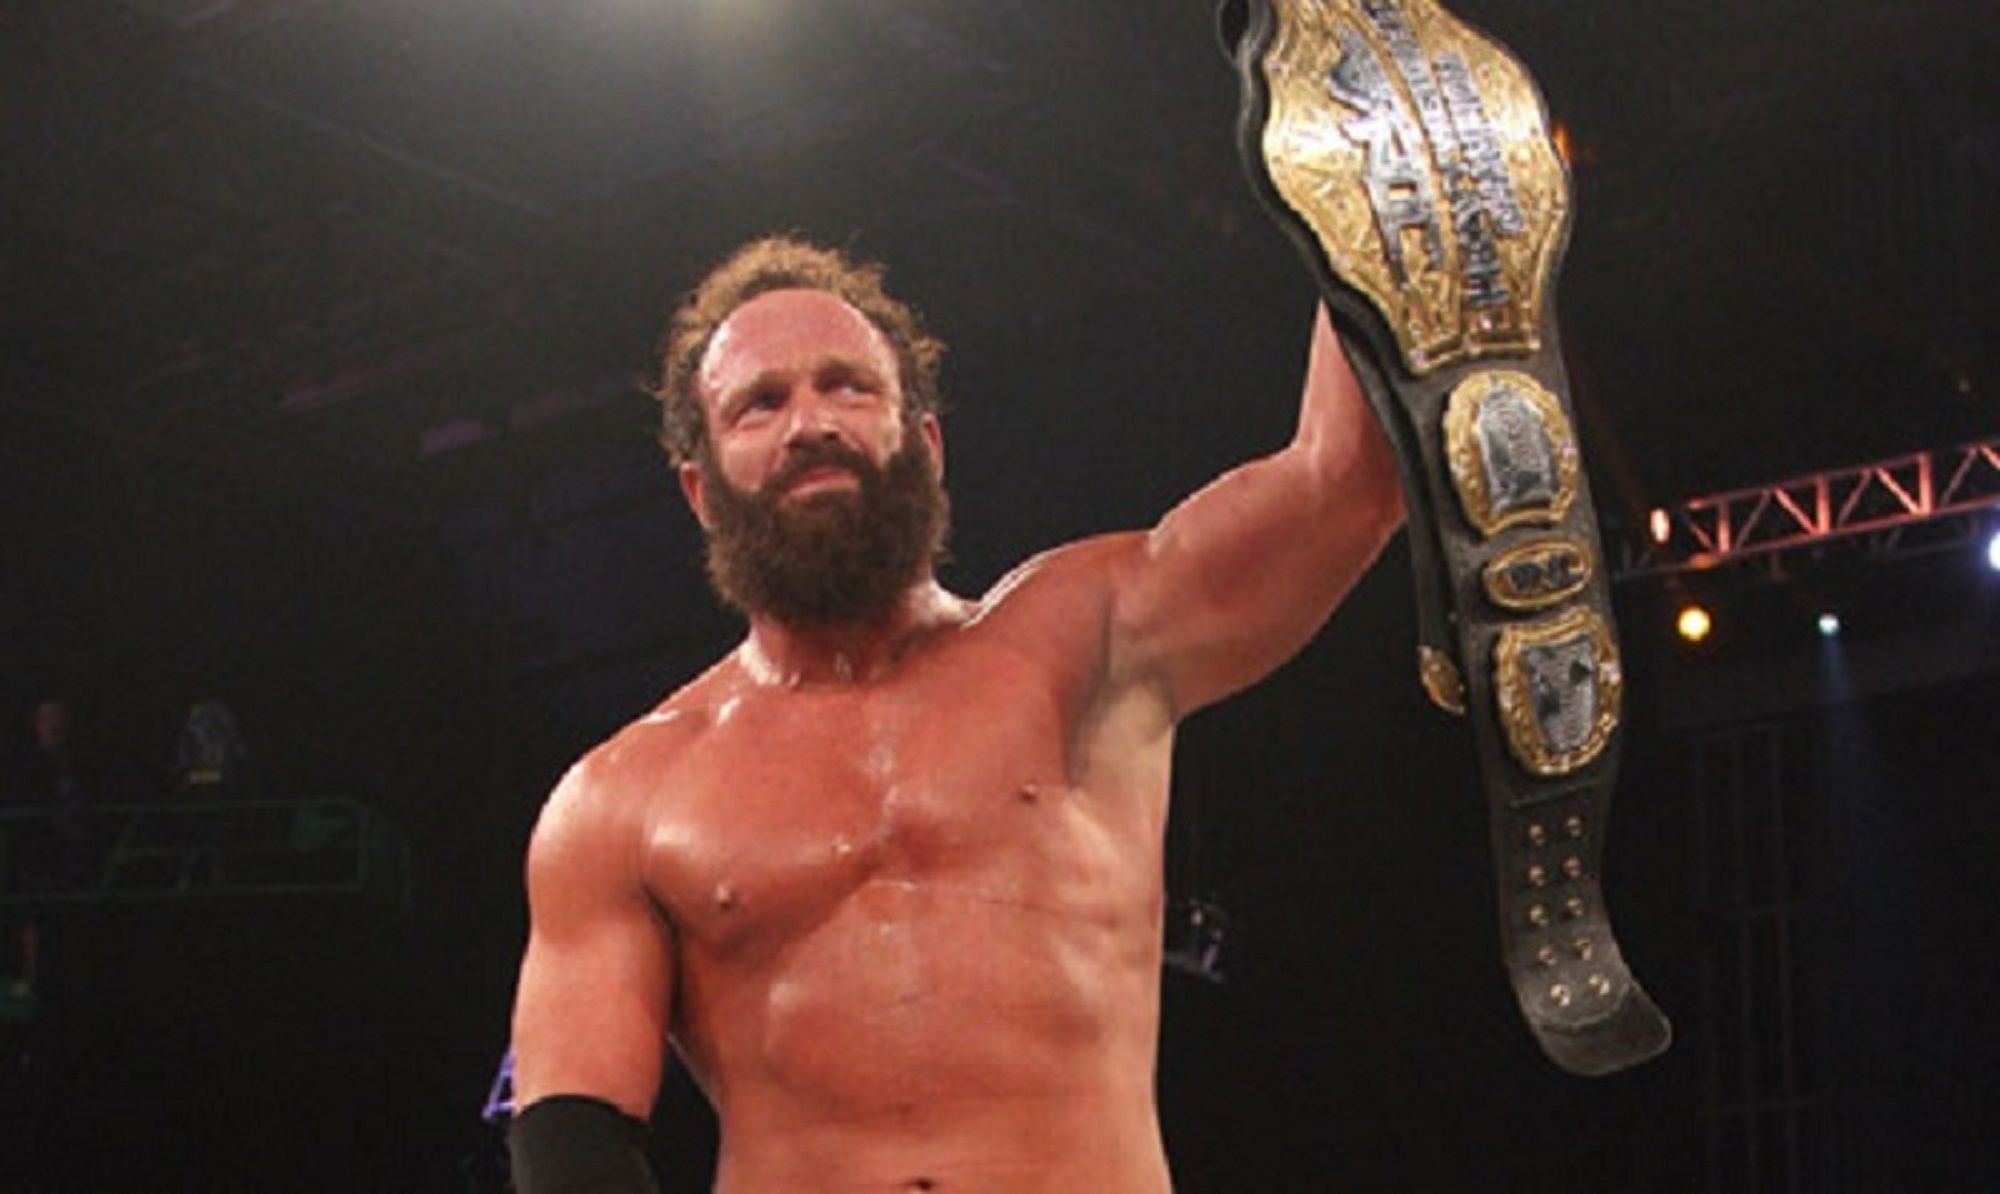 Eric Young as TNA world champion